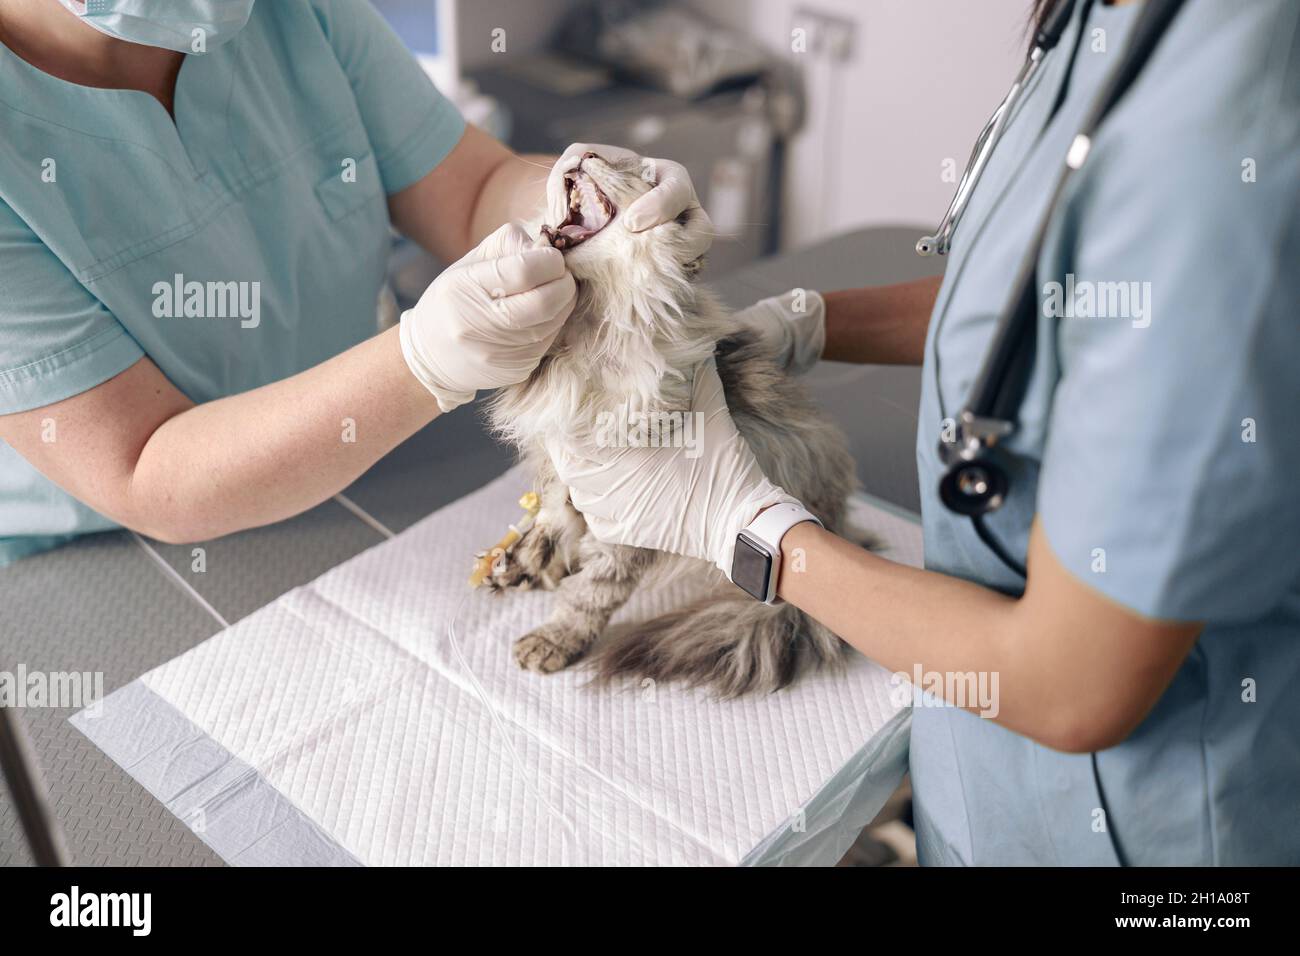 Professional veterinarians examine oral cavity of grey cat in clinic Stock Photo